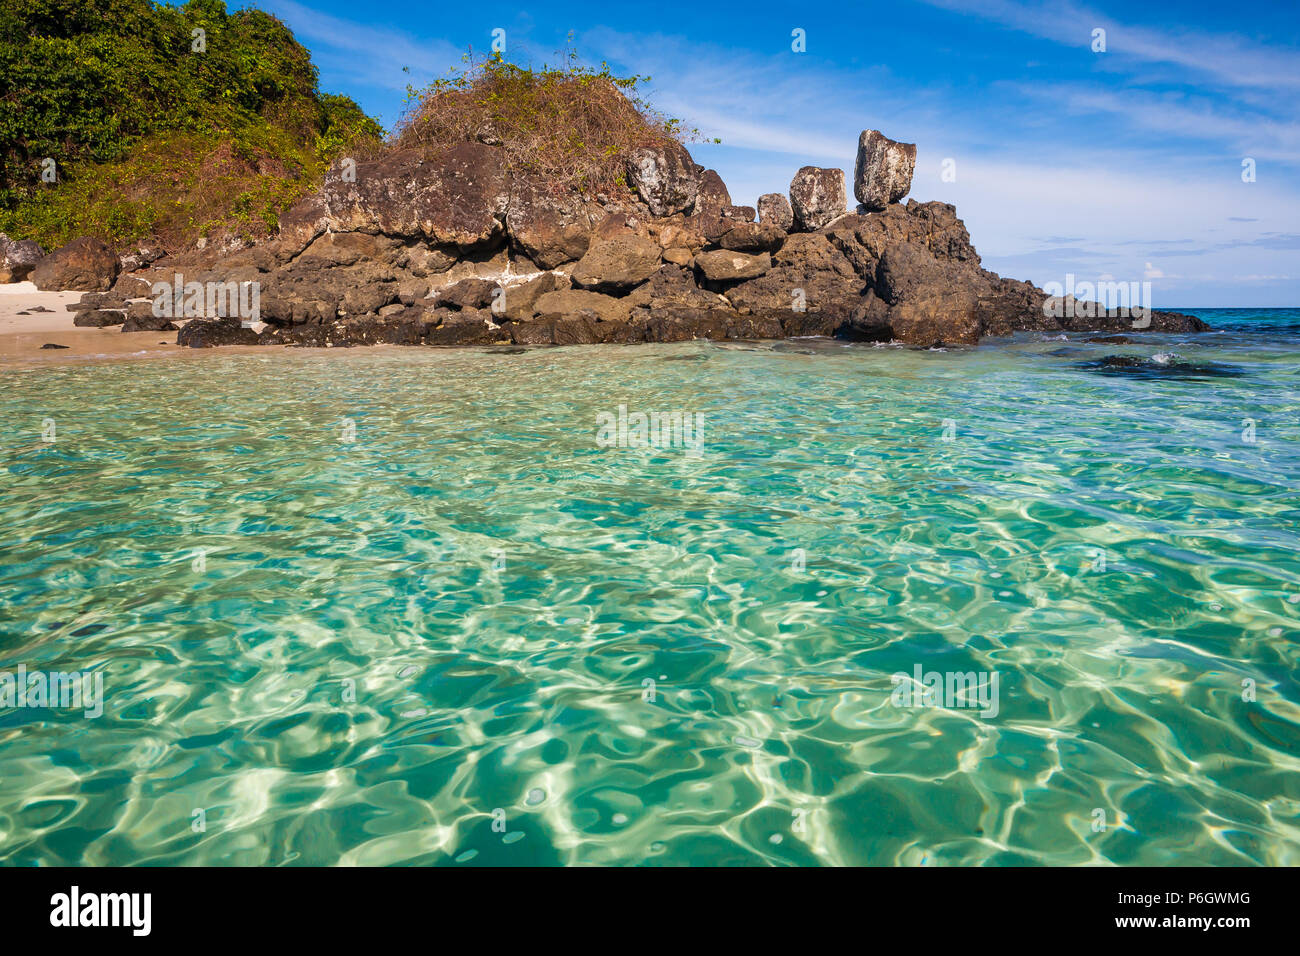 Panama landscape with beautiful transparent water and rocks at Granito de Oro in Coiba island national park, Pacific coast, Republic of Panama. Stock Photo